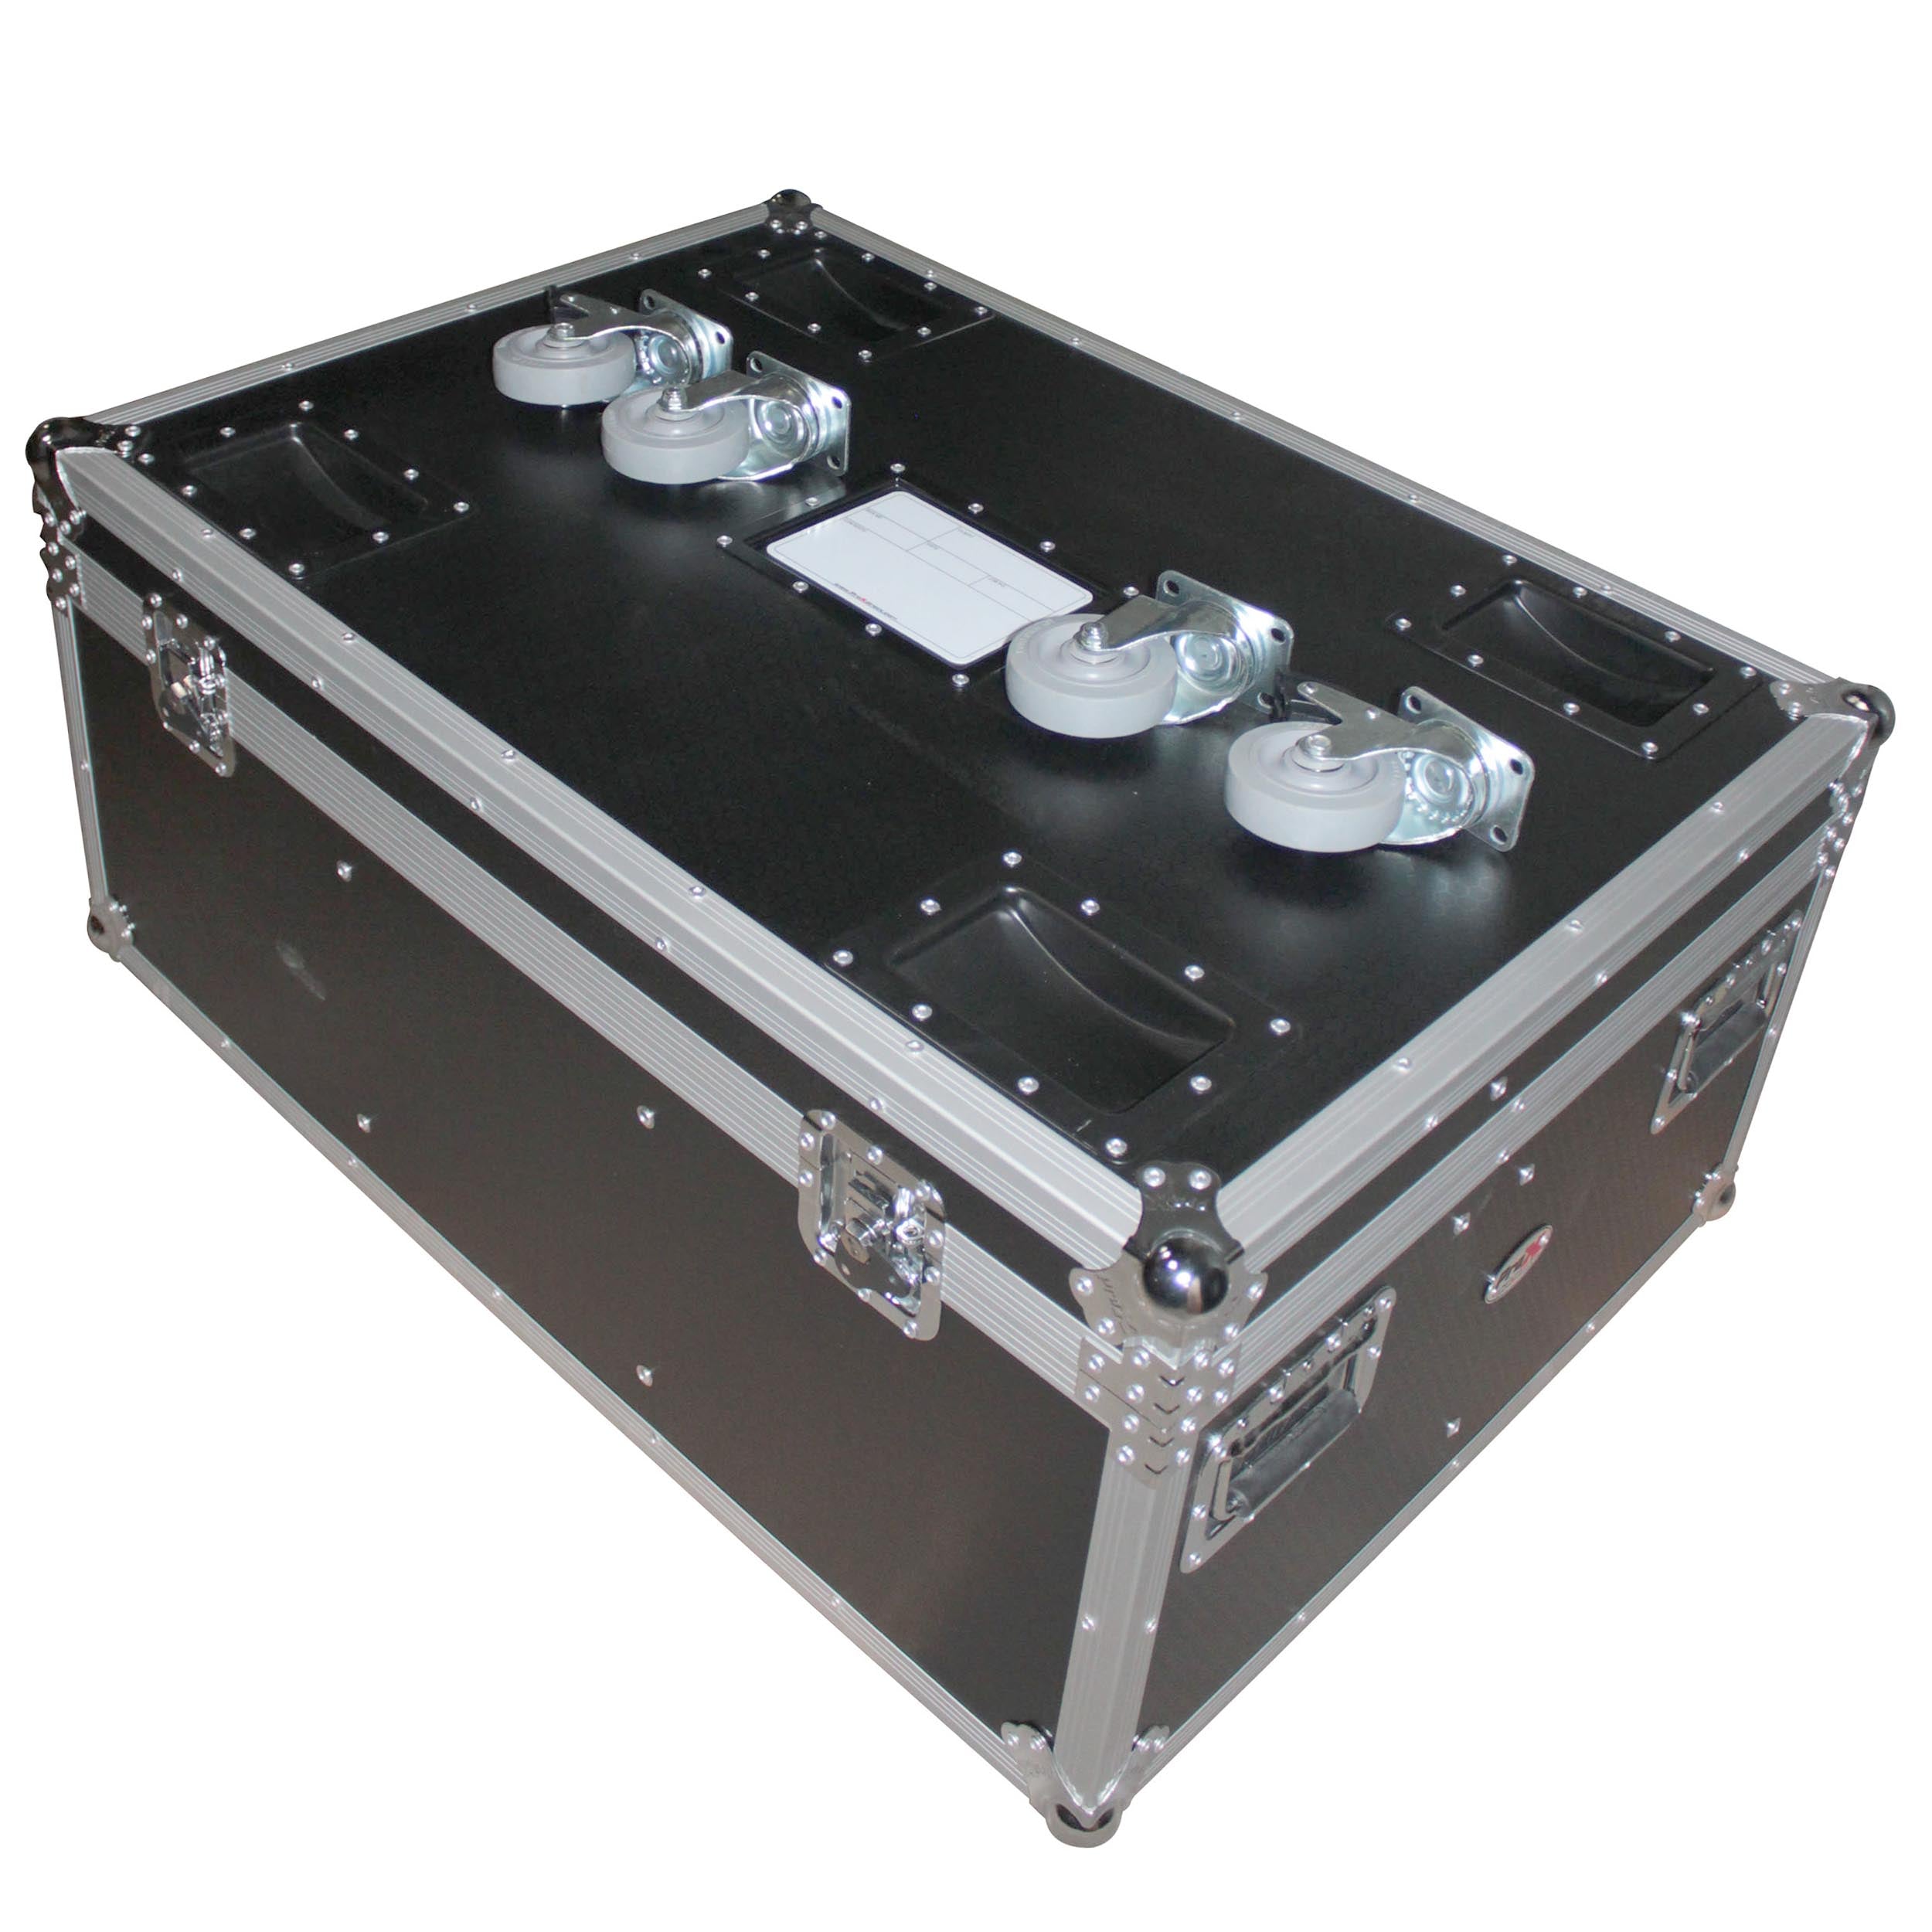 Pro X Par Can Universal Utility Case 4" Wheels Will Hold 6 of 12" x12" Large or 12 of 12" x 5.5" Slim LED Par Lights XS-PARU612W